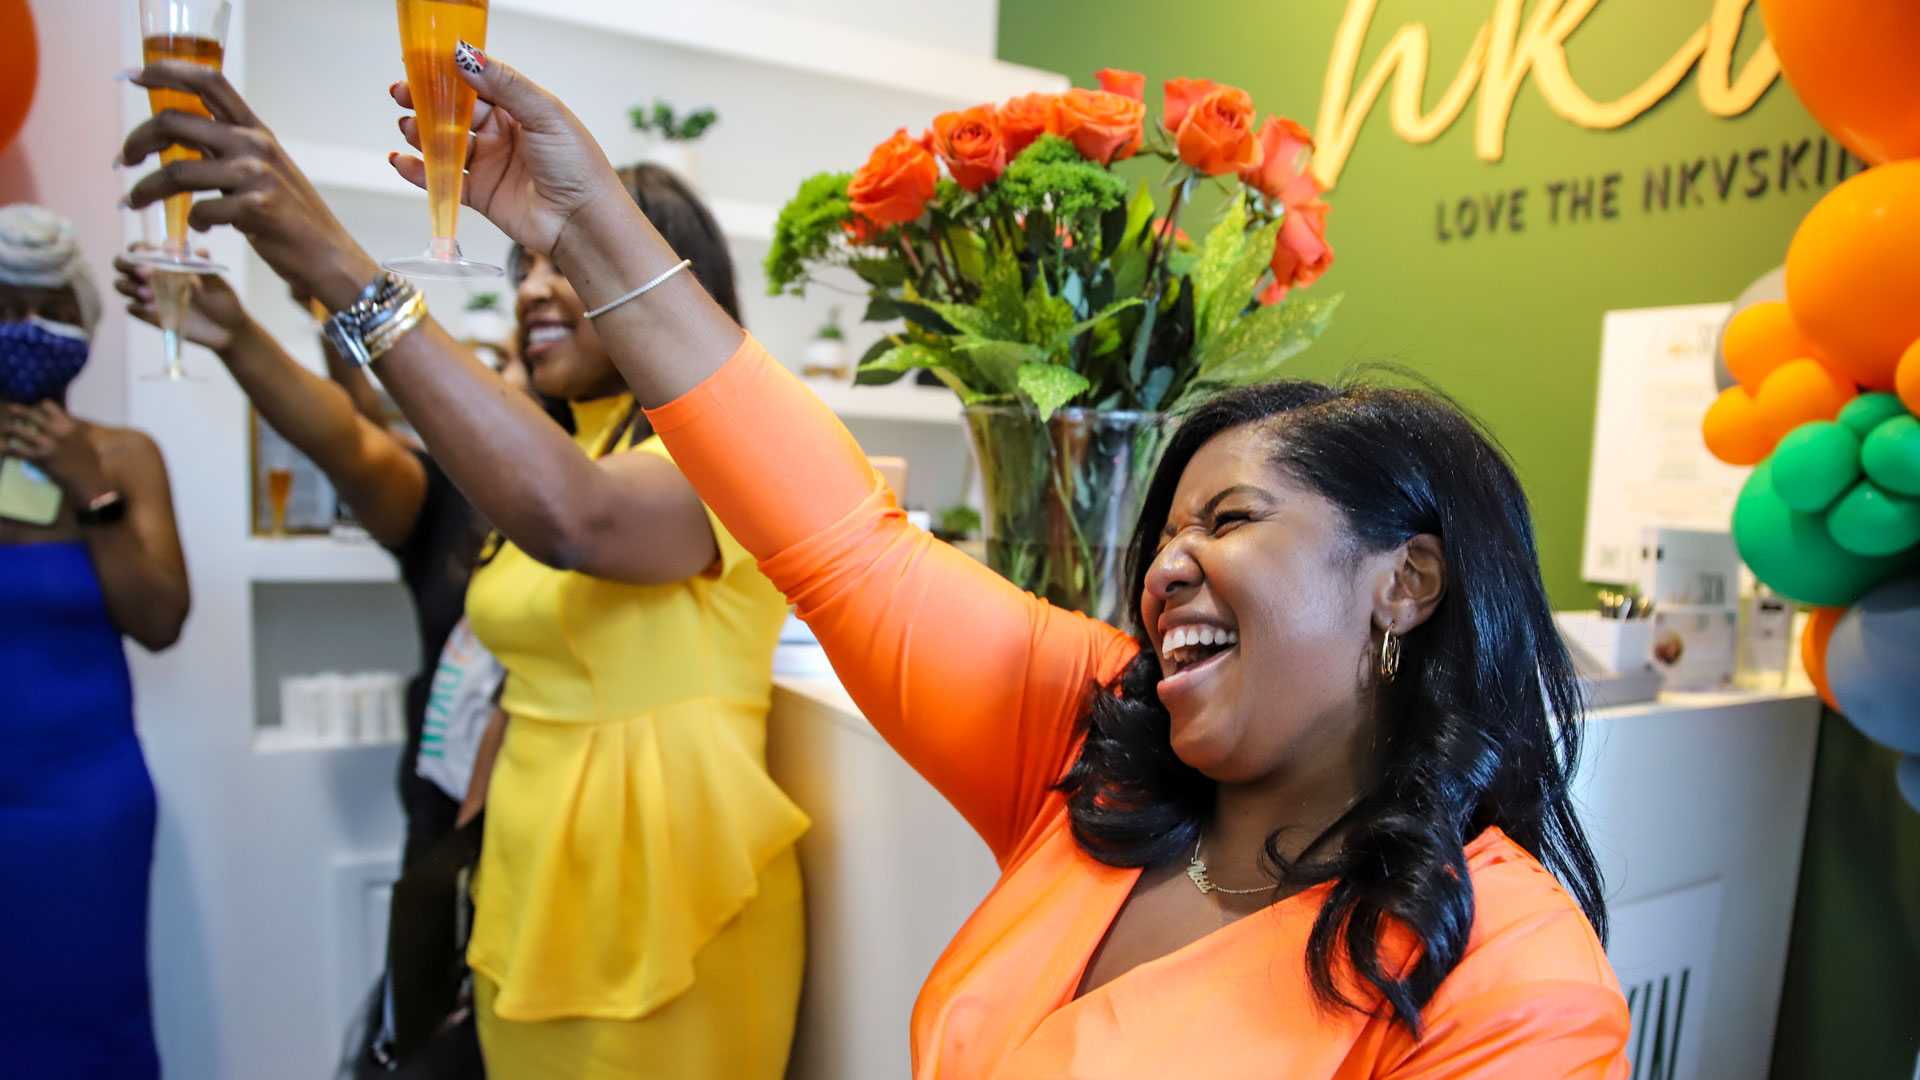 Nikia Vaughan leads a toast to celebrate the grand opening of NKVSKIN.